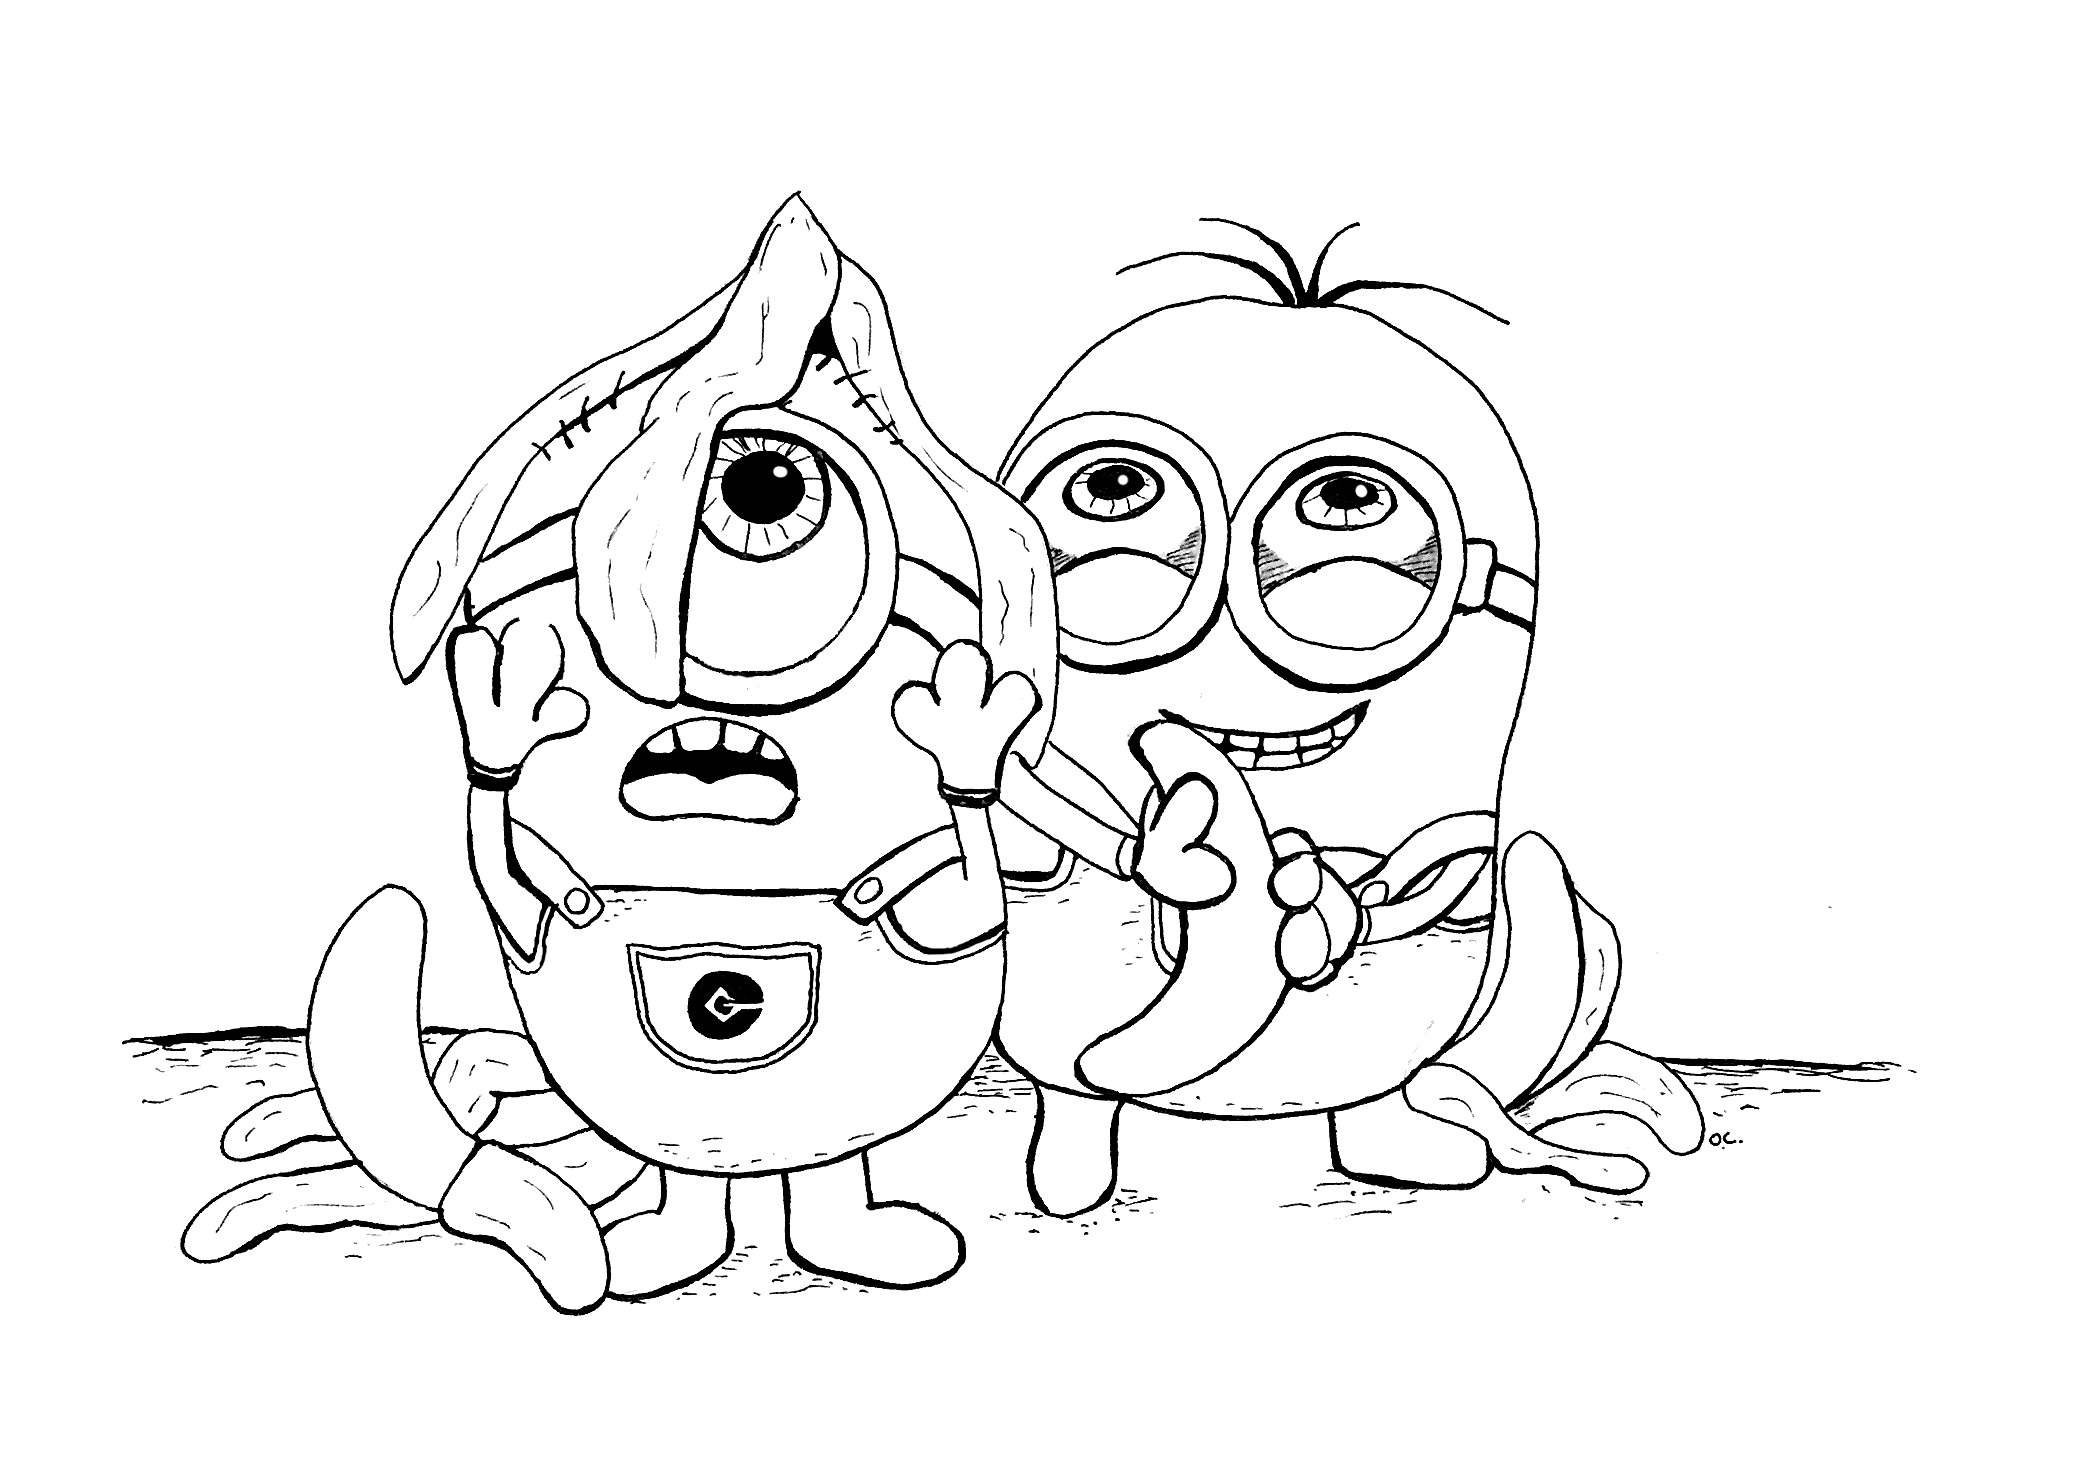 Two Minions and bananas to color. This design features two of the famous Minions, receiving bananas that have fallen from the sky. Apply bright colors or your favorite colors. You can also add extra details to make the coloring even more fun.This coloring page is perfect for kids and adults alike, and is sure to keep you entertained and having a good time, Artist : Olivier